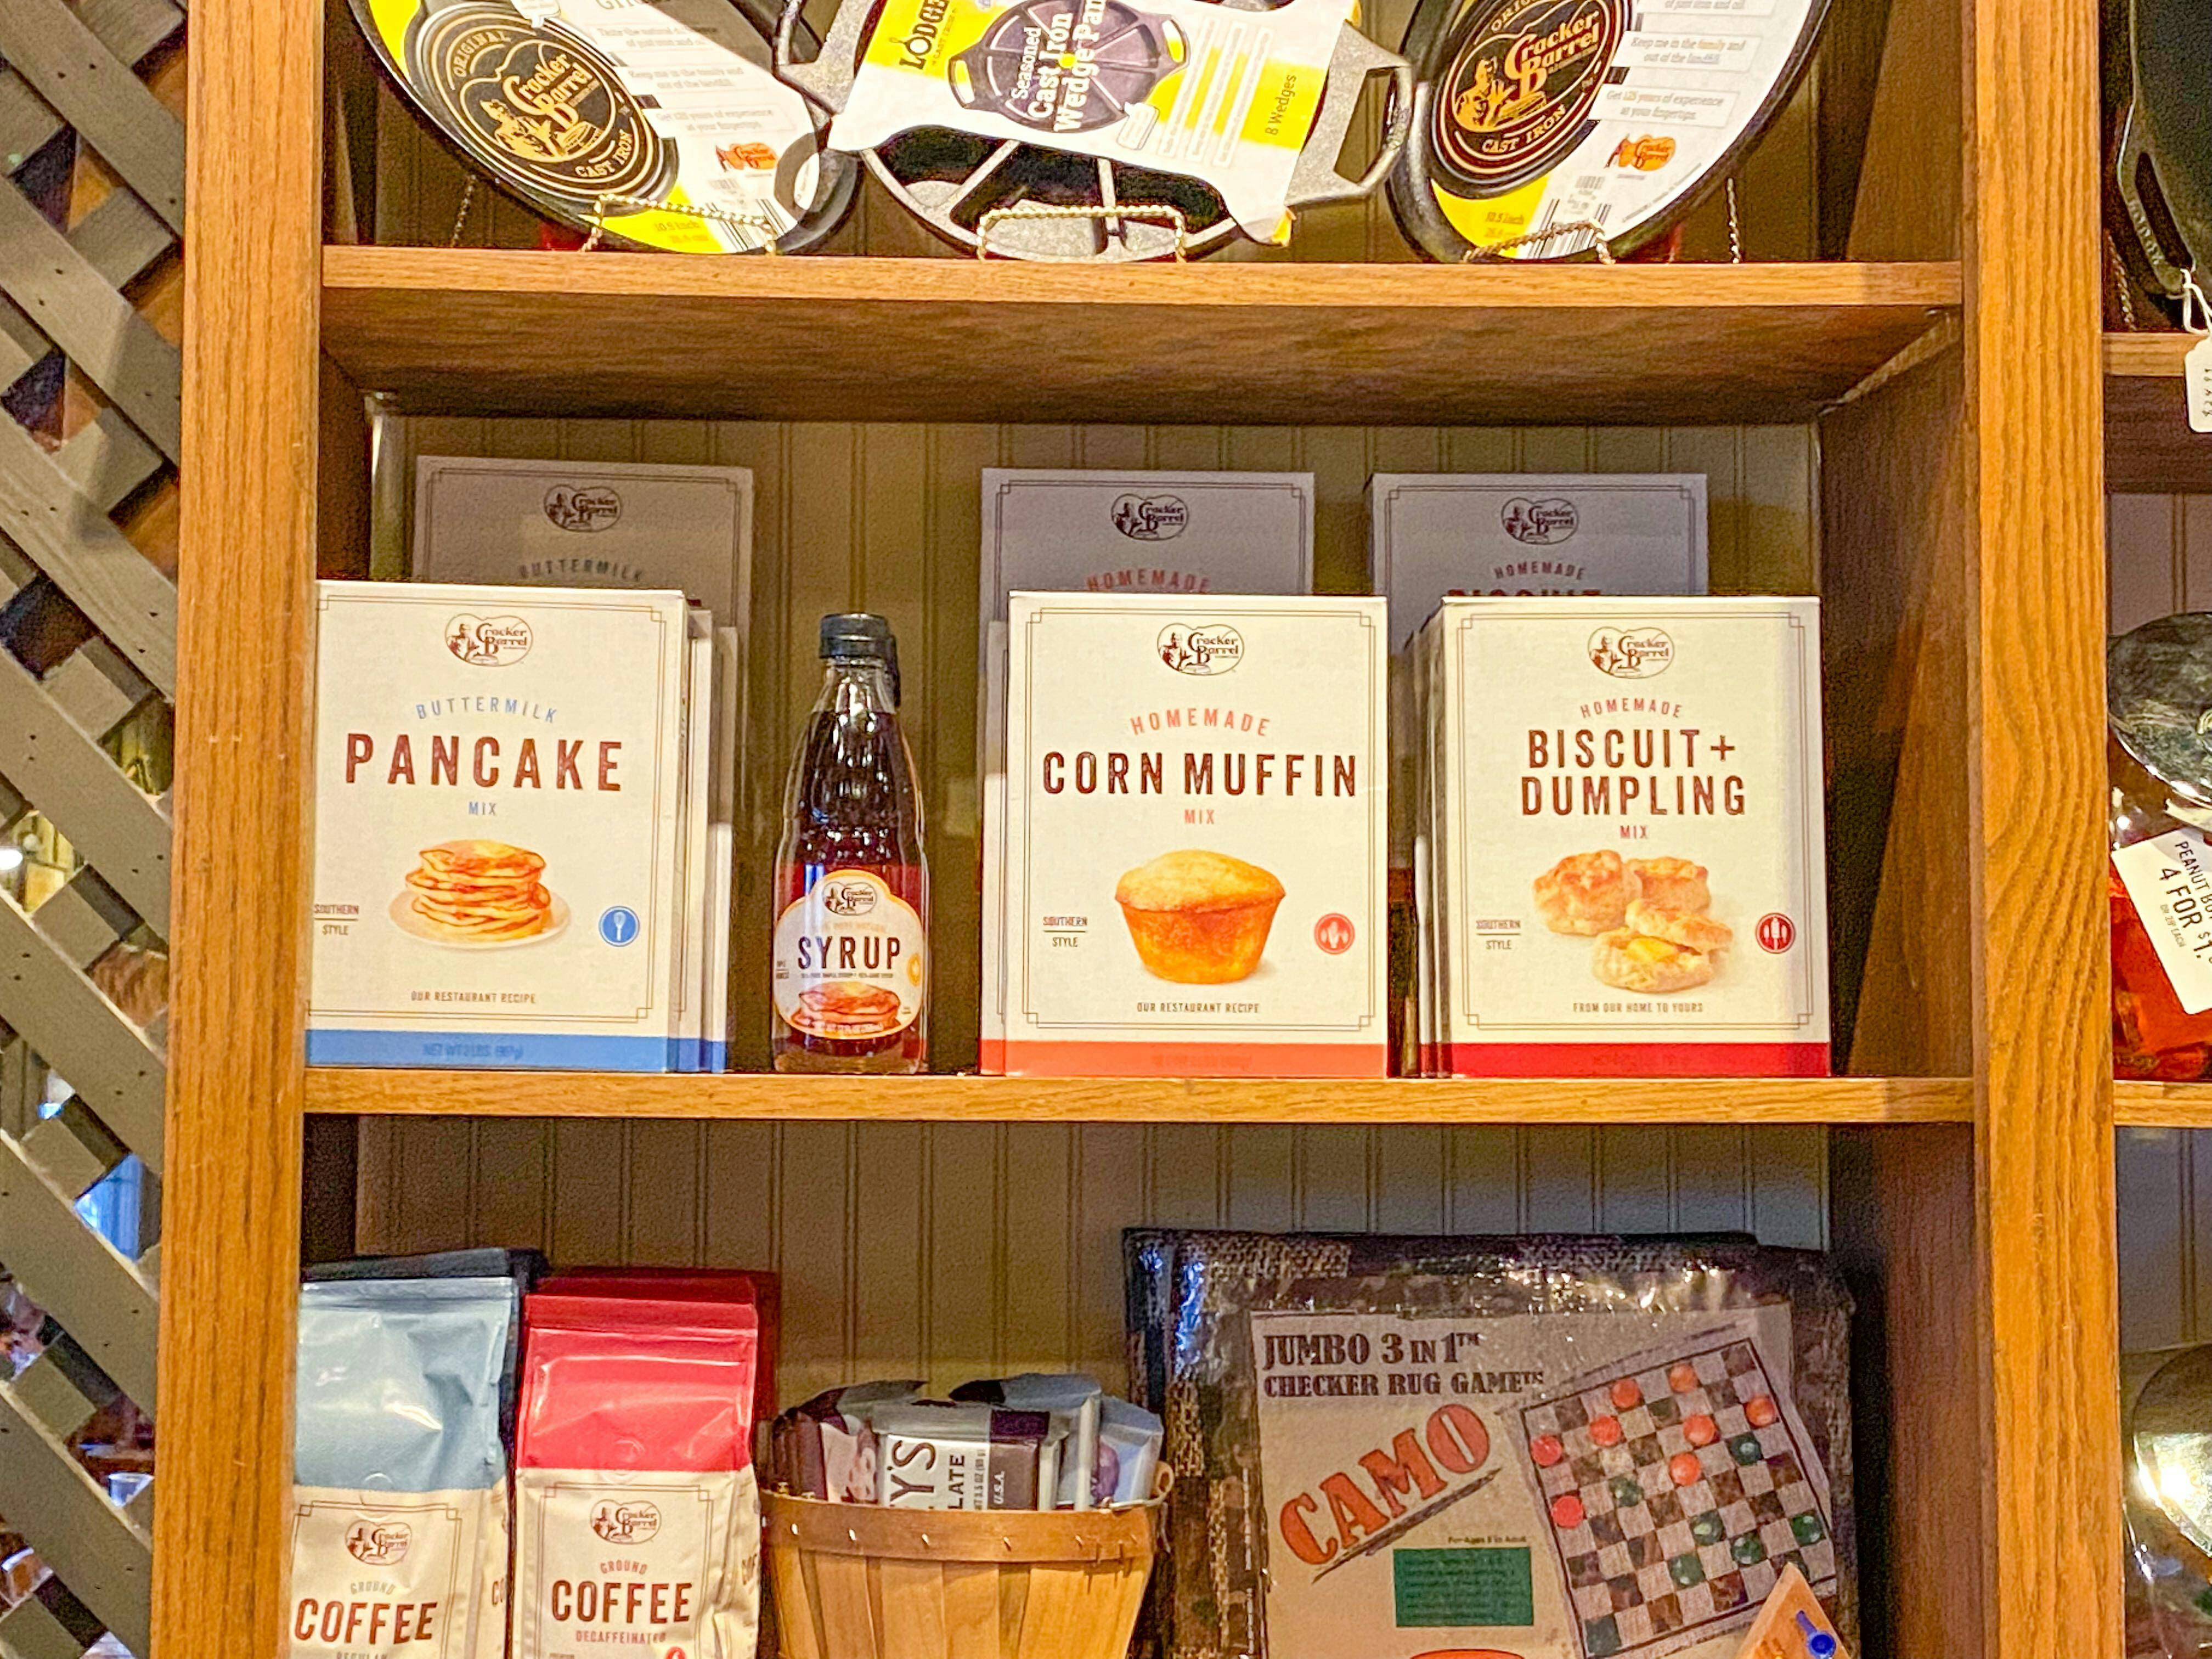 A shelf inside Cracker Barrel where boxes of pancake mix and other purchasable products are stocked.